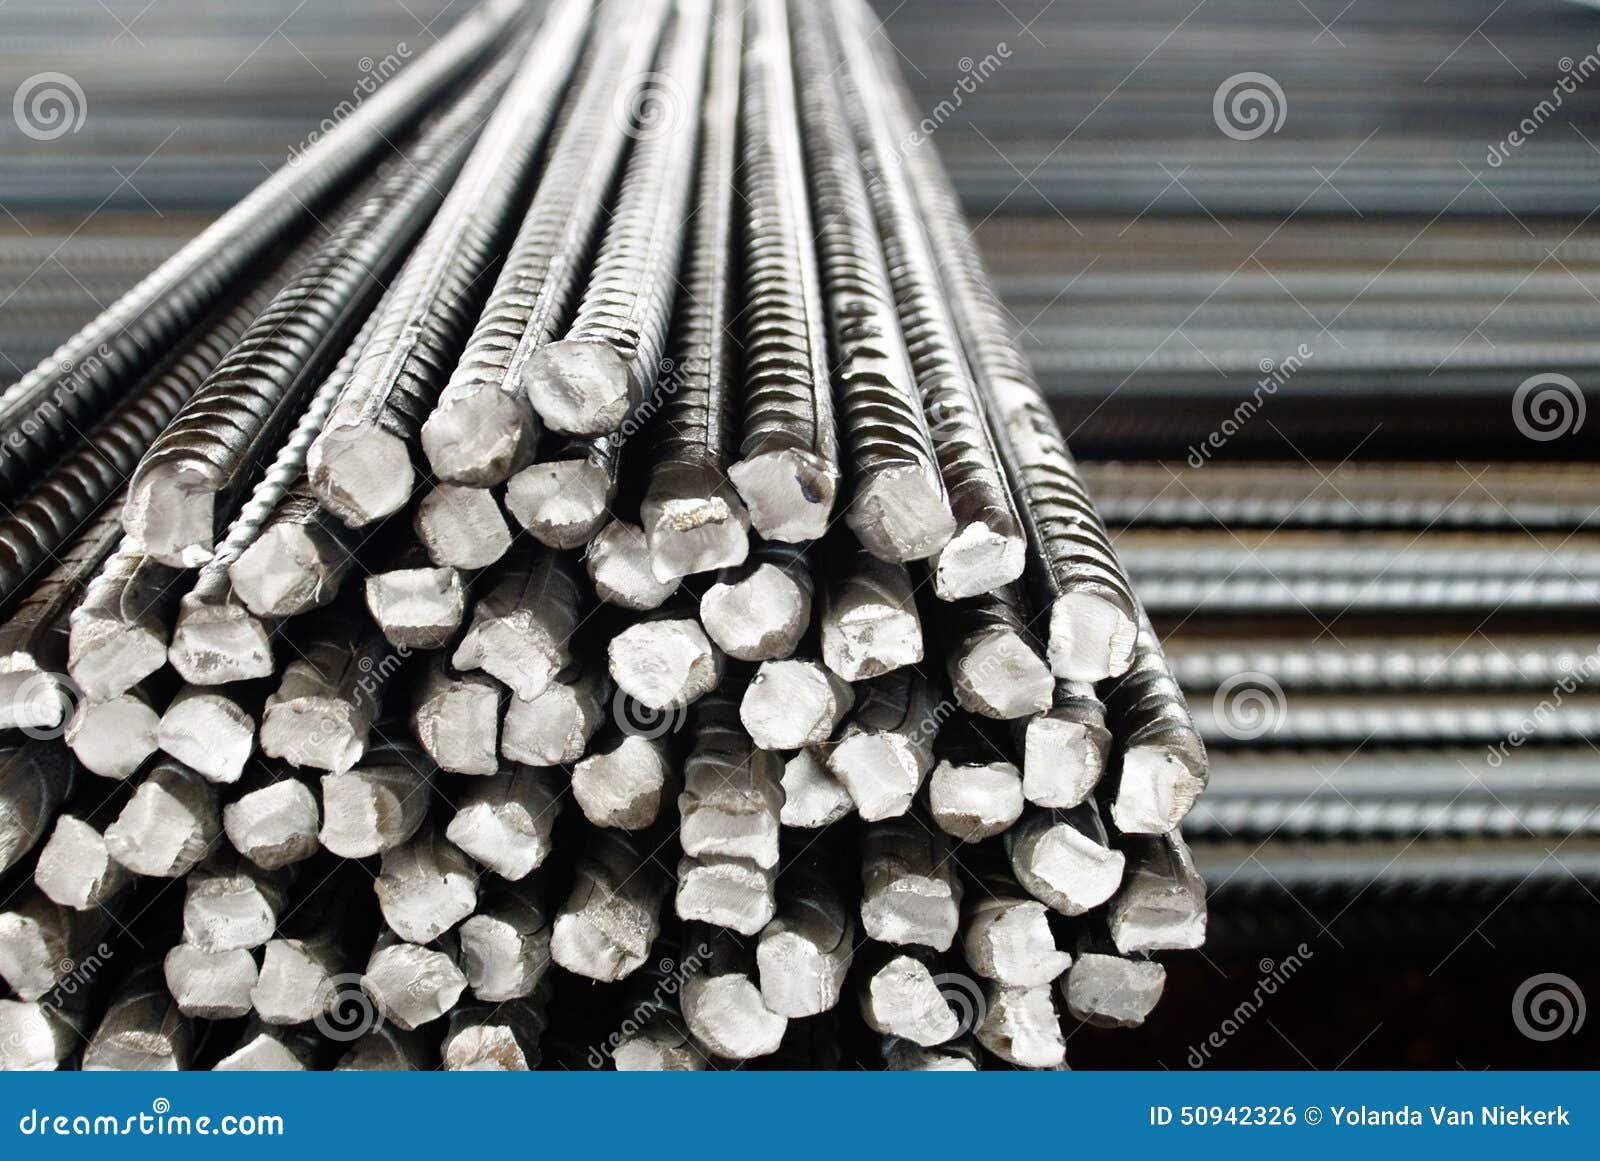 closeup of steel rods or bars, to reinforce concrete